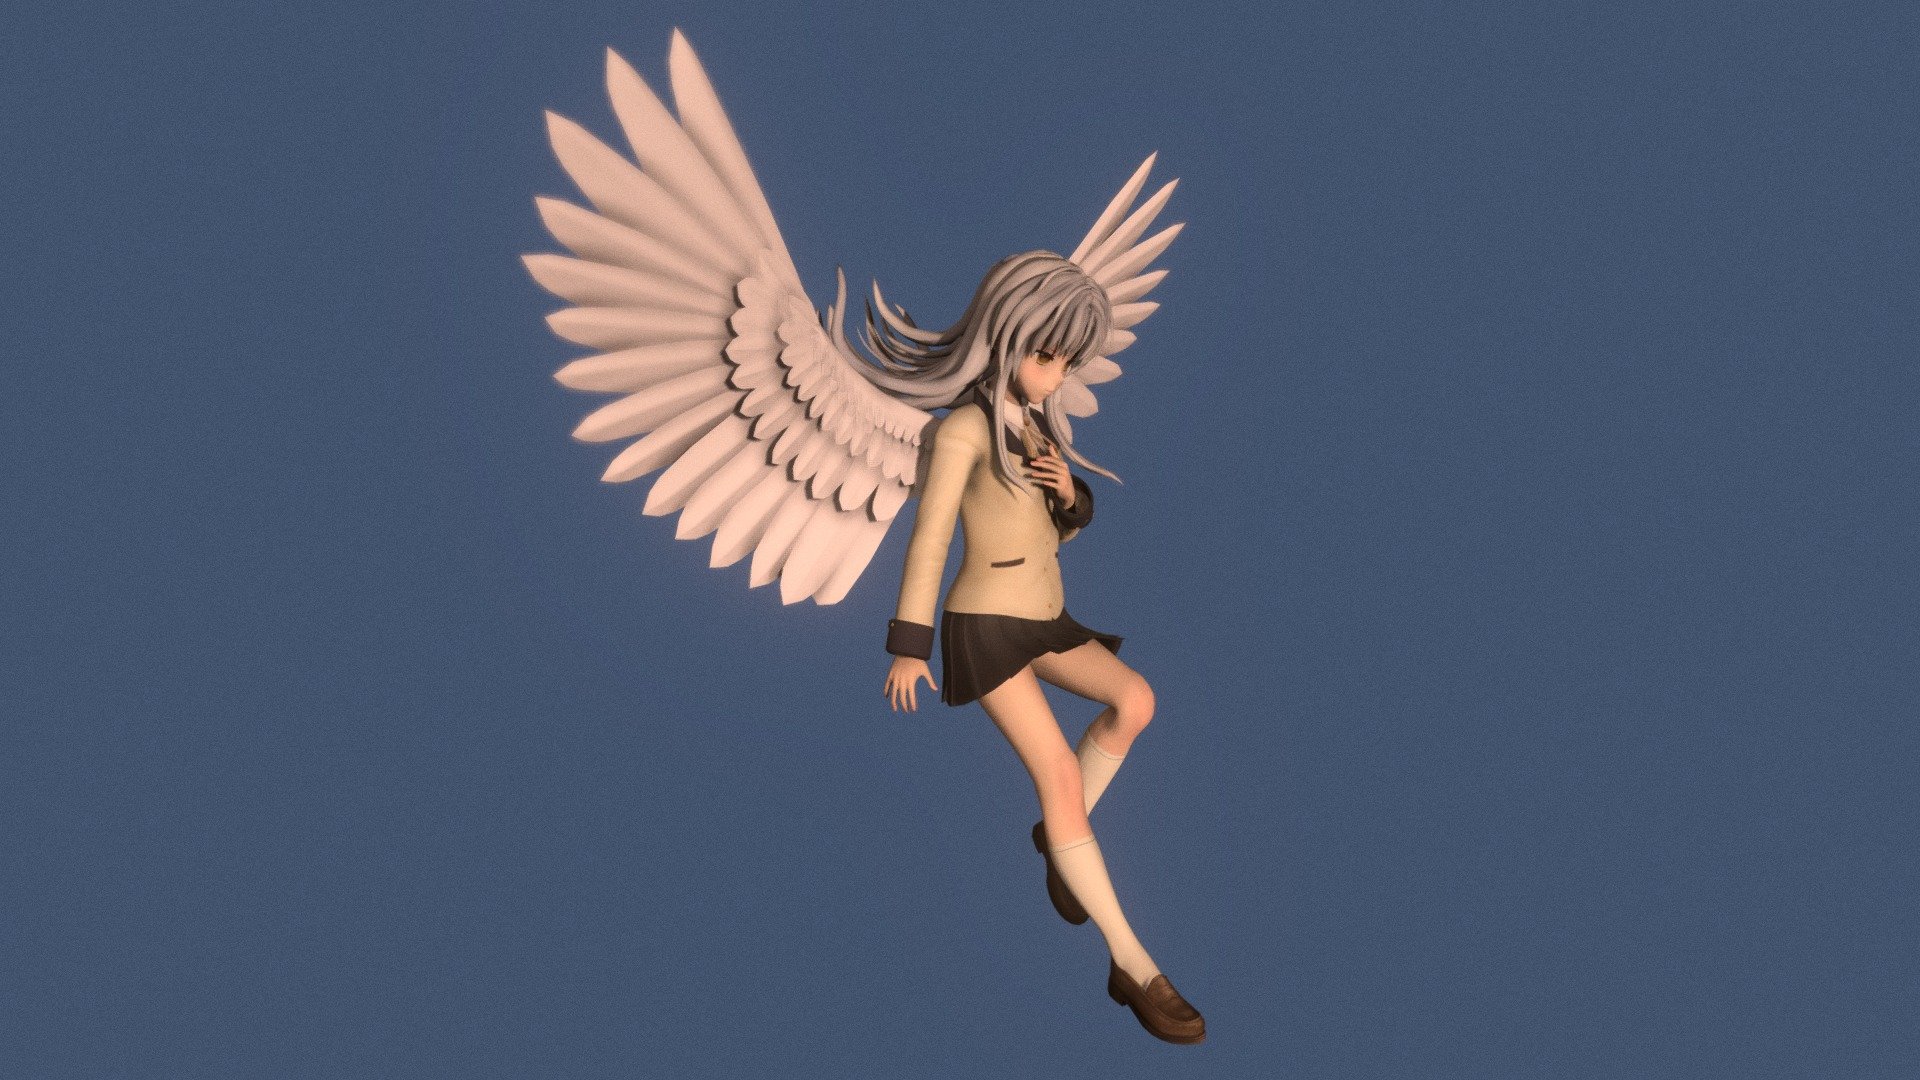 Posed model of anime girl Kanade Tachibana (Angel Beats!).

This product include .FBX (ver. 7200) and .MAX (ver. 2010) files.

Rigged version: https://sketchfab.com/3d-models/t-pose-rigged-model-of-kanade-tachibana-5ccd5f7eeda44bebab416995d409a551

I support convert this 3D model to various file formats: 3DS; AI; ASE; DAE; DWF; DWG; DXF; FLT; HTR; IGS; M3G; MQO; OBJ; SAT; STL; W3D; WRL; X.

You can buy all of my models in one pack to save cost: https://sketchfab.com/3d-models/all-of-my-anime-girls-c5a56156994e4193b9e8fa21a3b8360b

And I can make commission models.

If you have any questions, please leave a comment or contact me via my email 3d.eden.project@gmail.com 3d model